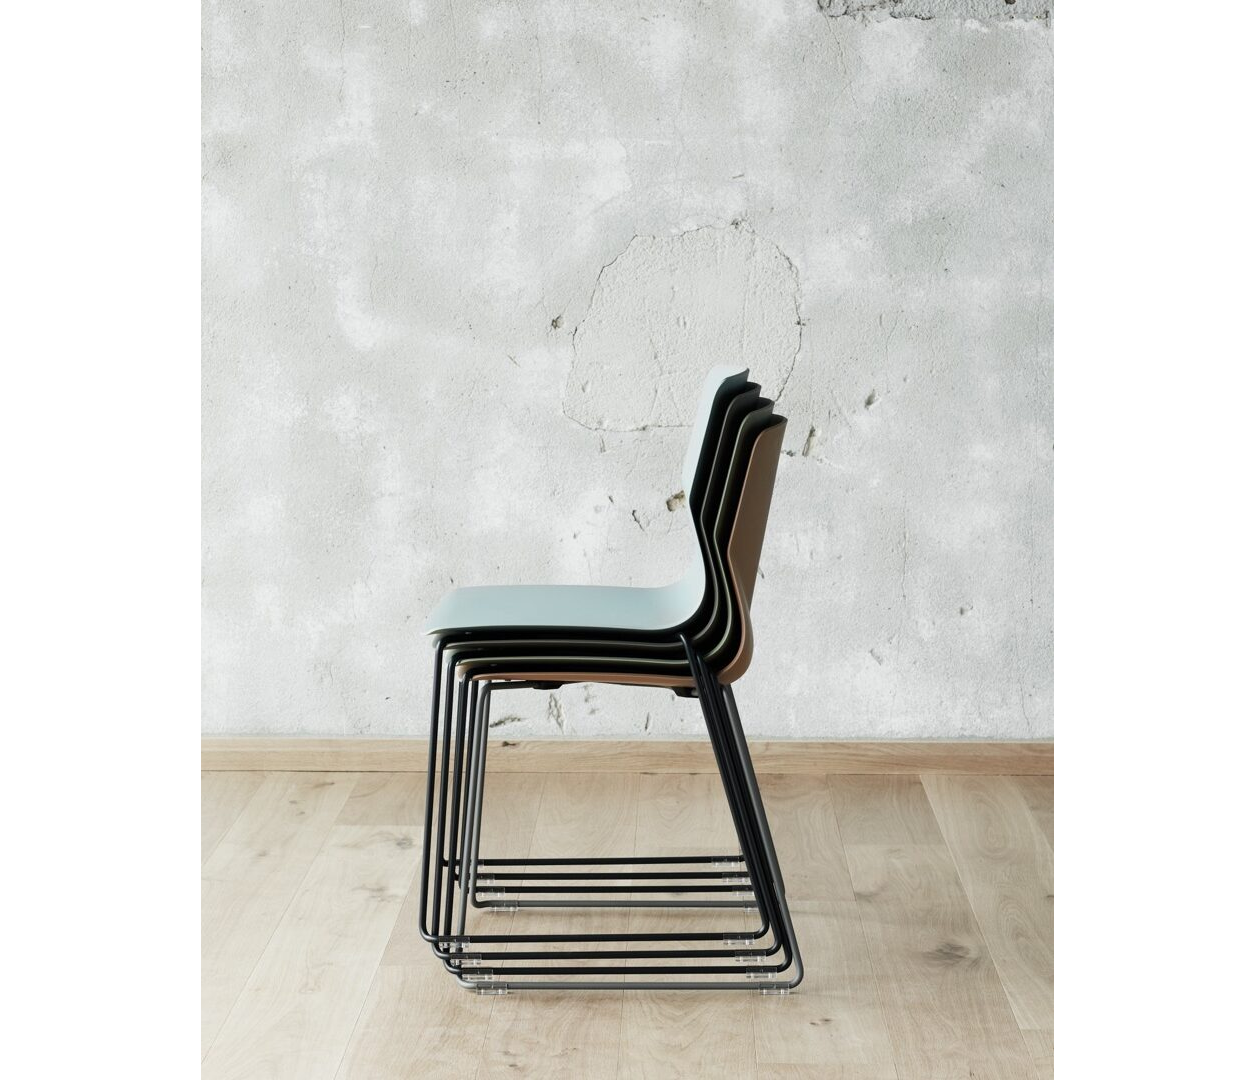 OCEE&FOUR – Chairs – FourSure 88 – Details Image 7 Large